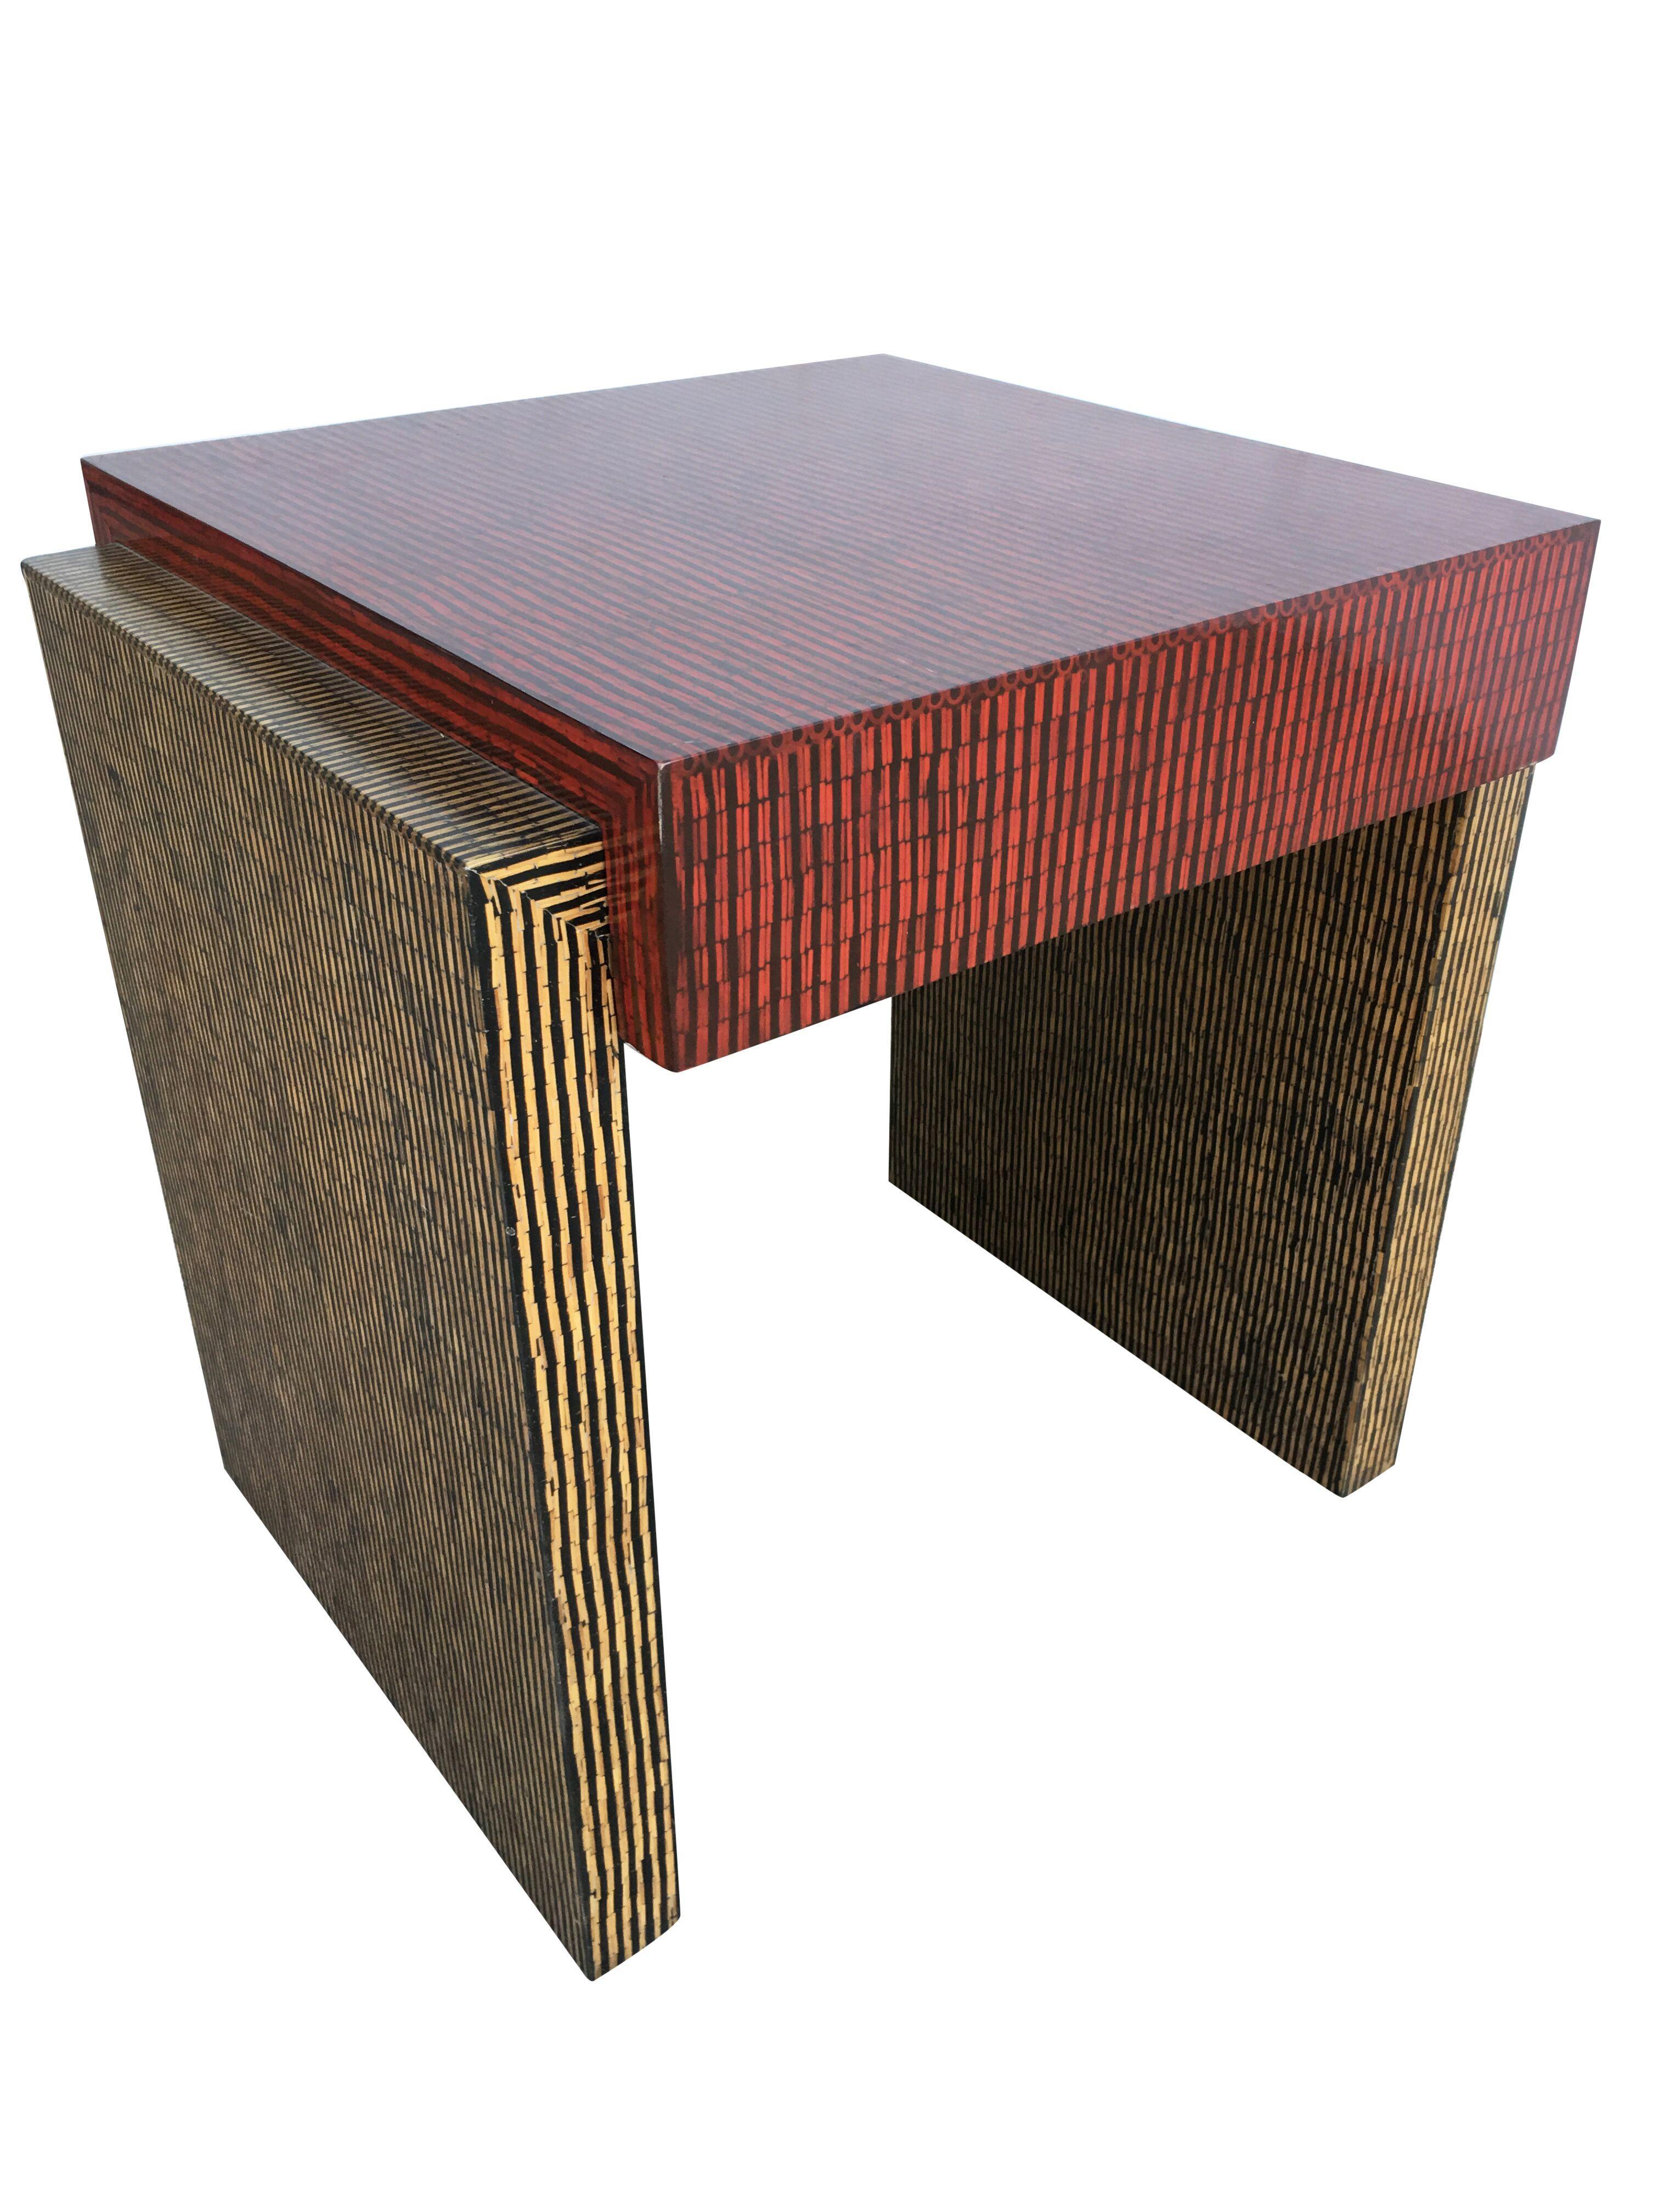 Two-tone cubist style side table pair with red and tan textured vinyl tops.